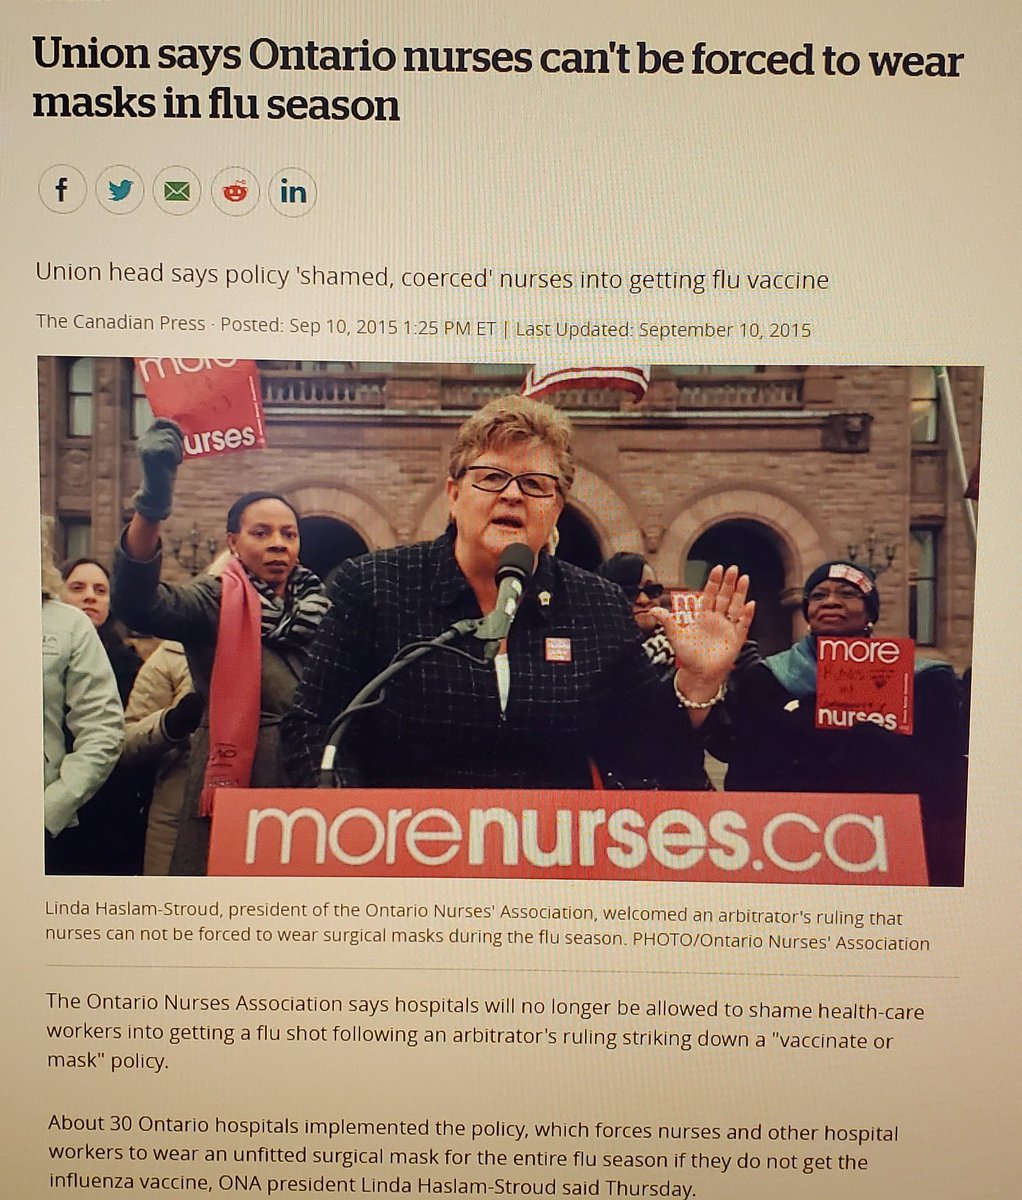 Ontario Nurses win right not to mask.  https://www.ona.org/news-posts/ona-wins-vaccinate-or-mask-flu-policy/